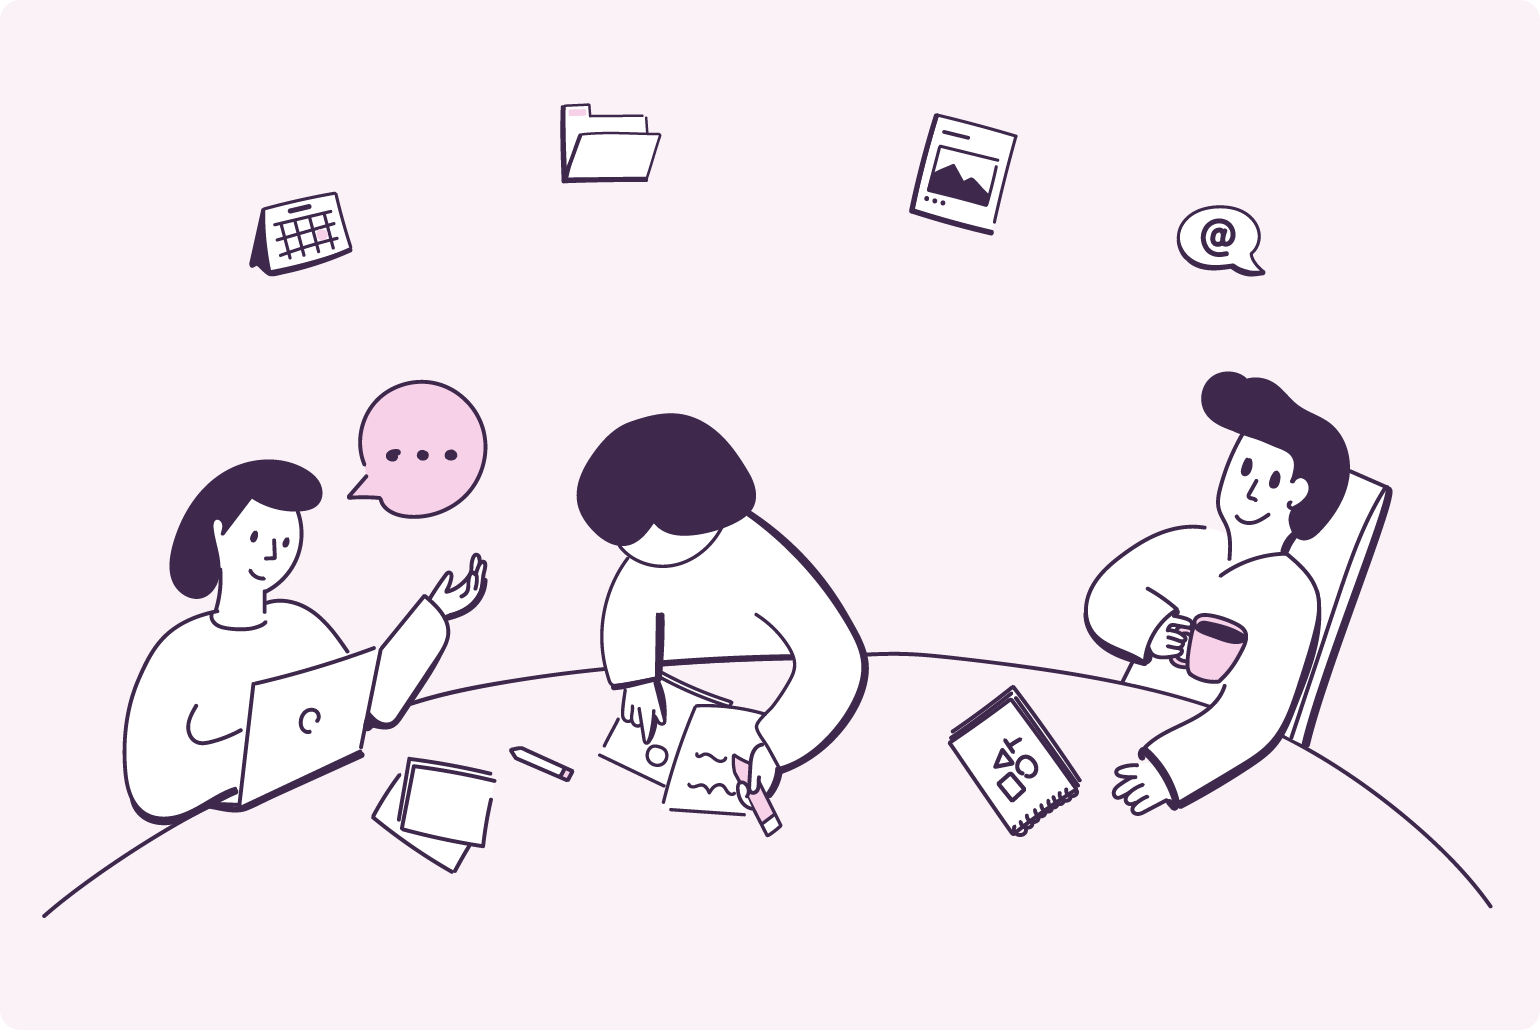 a graphic image showing a team collaborating and discussing a project